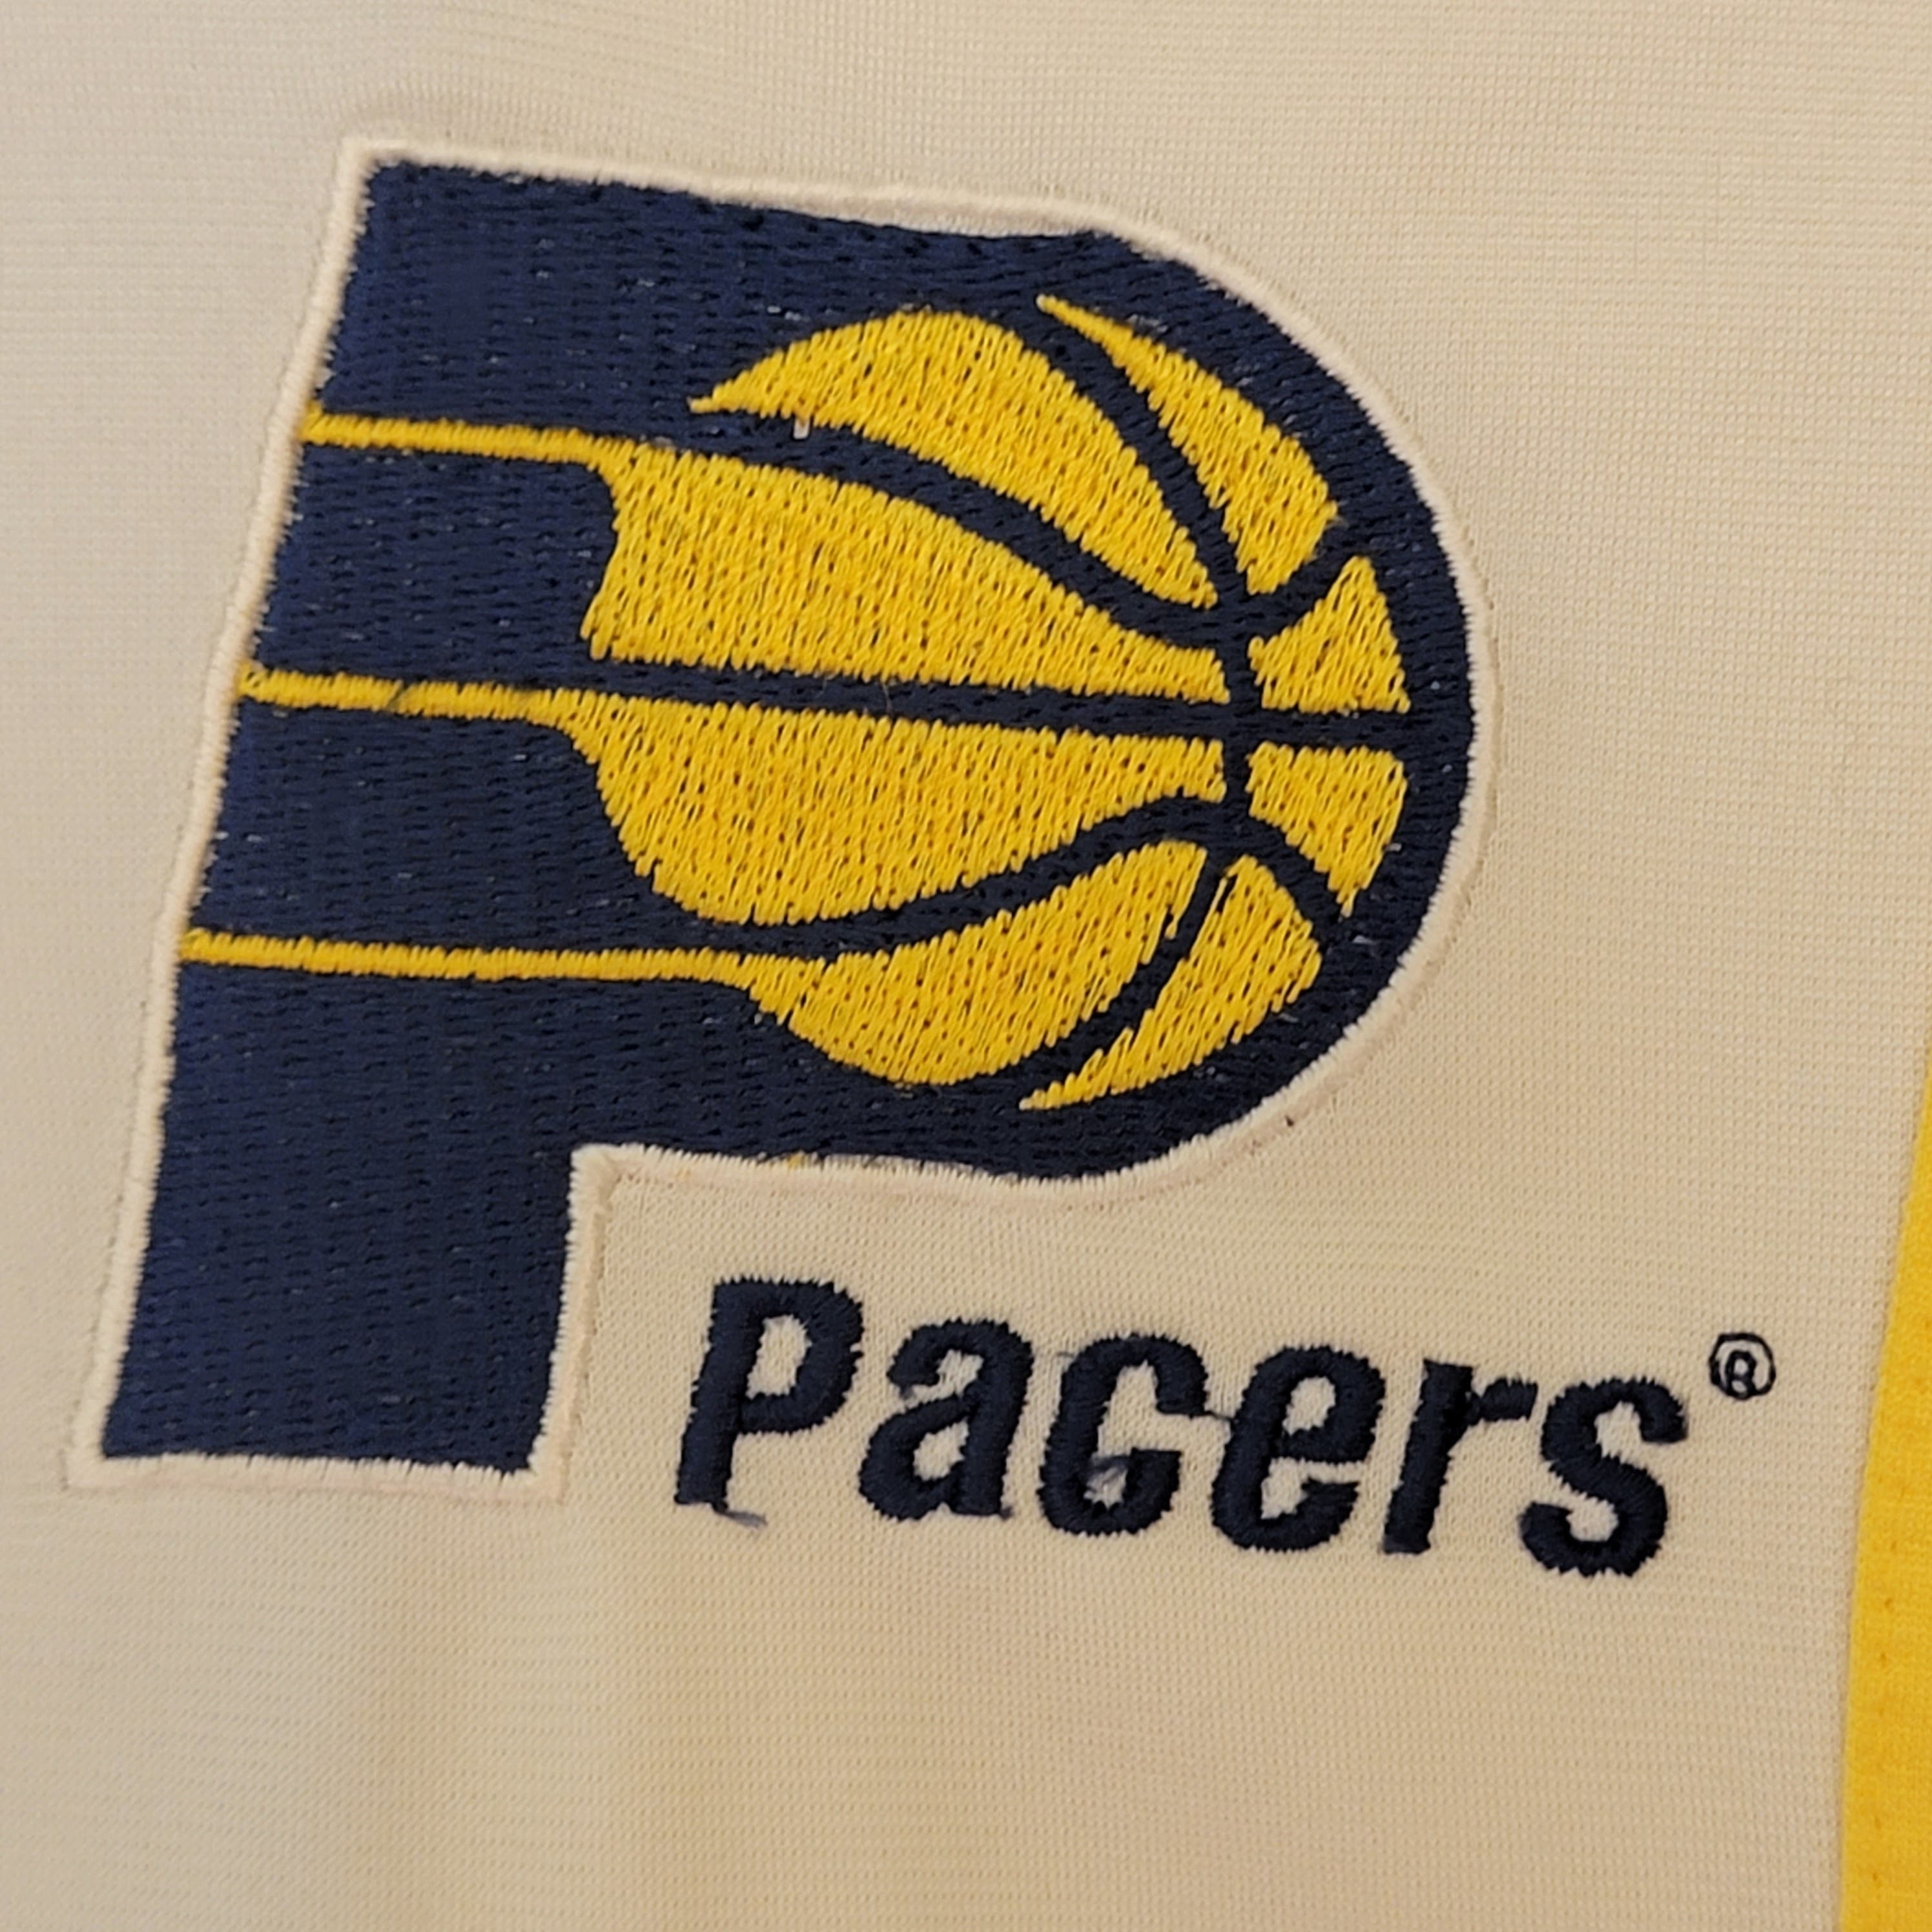 Vintage NBA Champion Indiana Pacers Warm up Basketball Jersey 